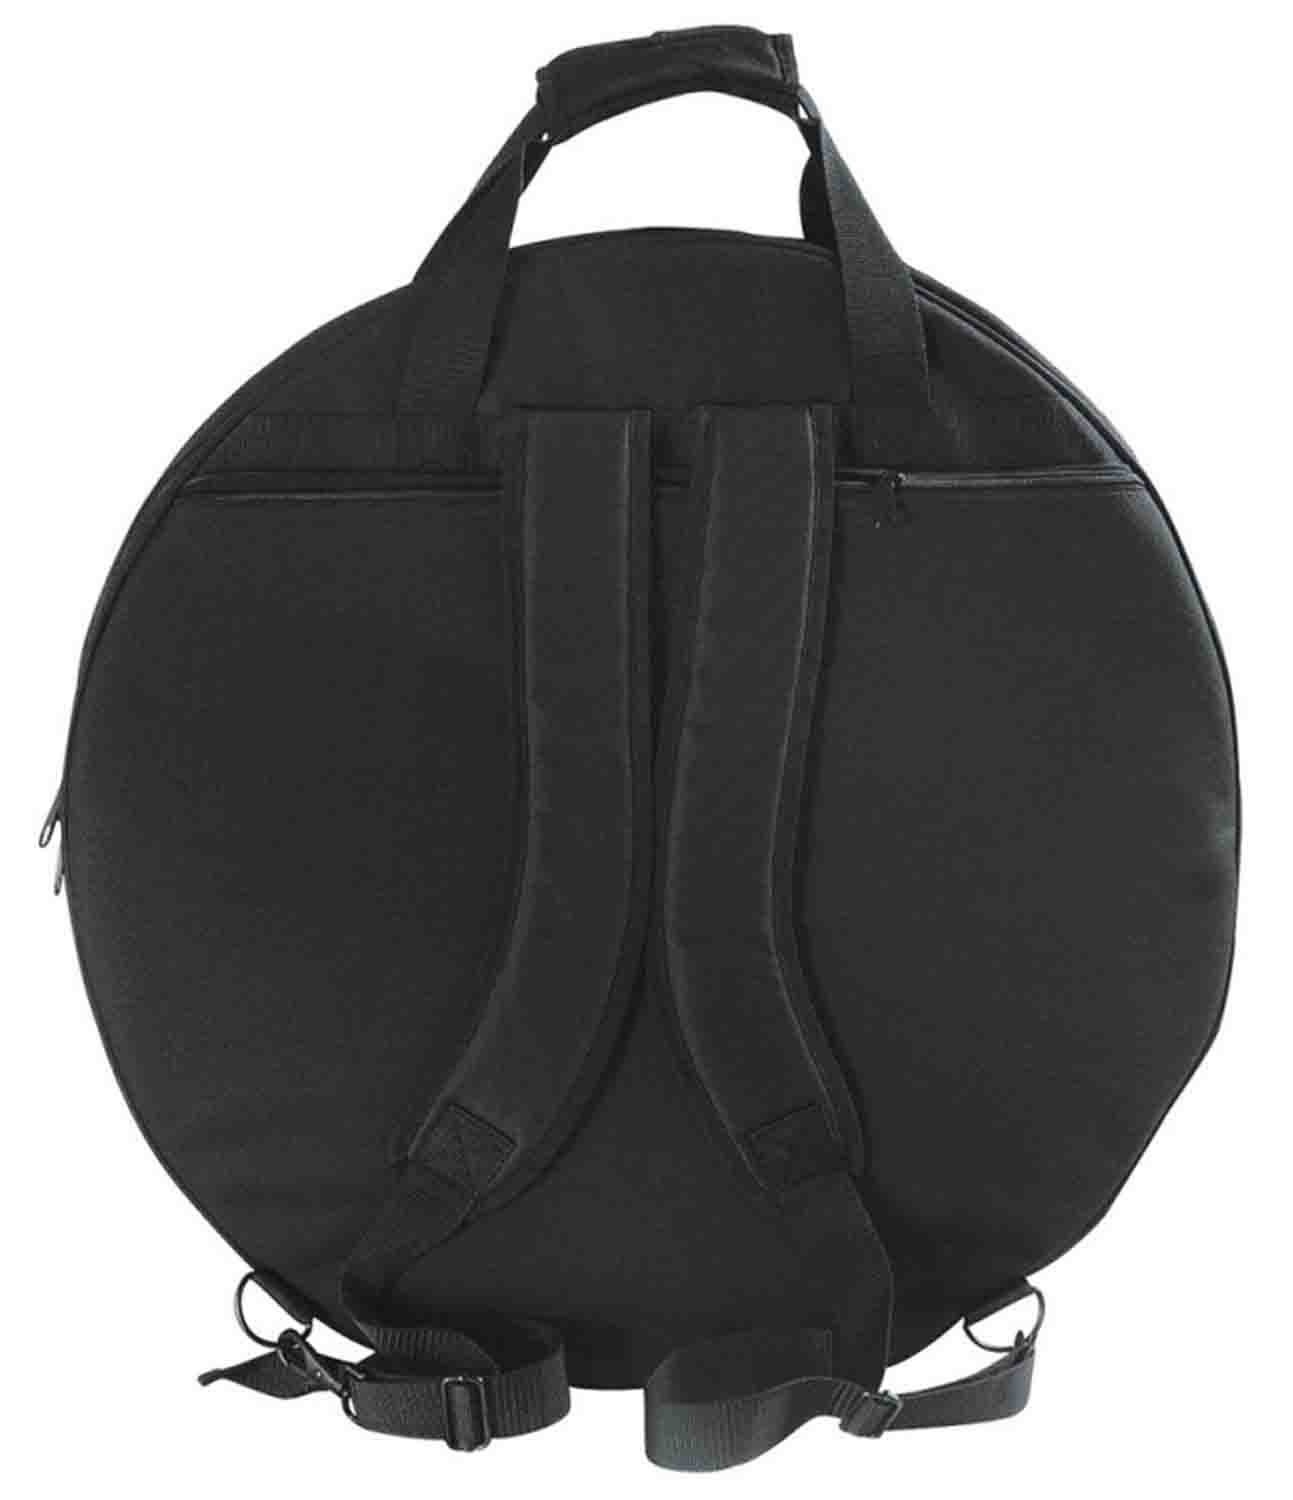 OnStage CB4000 Deluxe Cymbal Bag - Black - Hollywood DJ